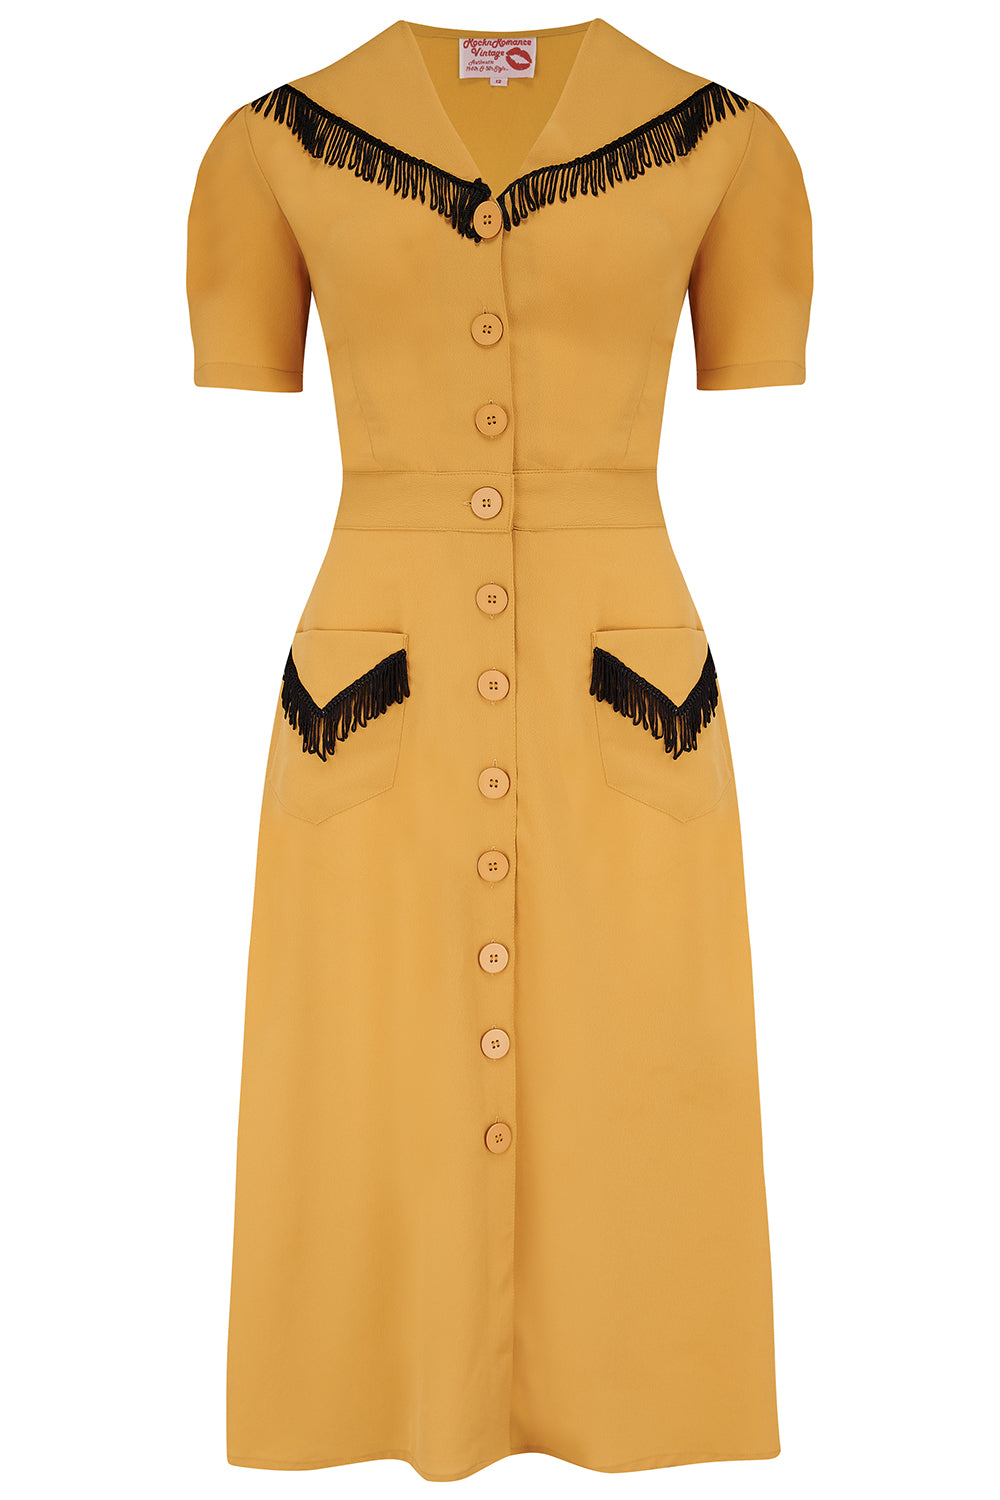 The "Dolly" Fringed Dress in Mustard, Authentic 1950s Vintage Western Style